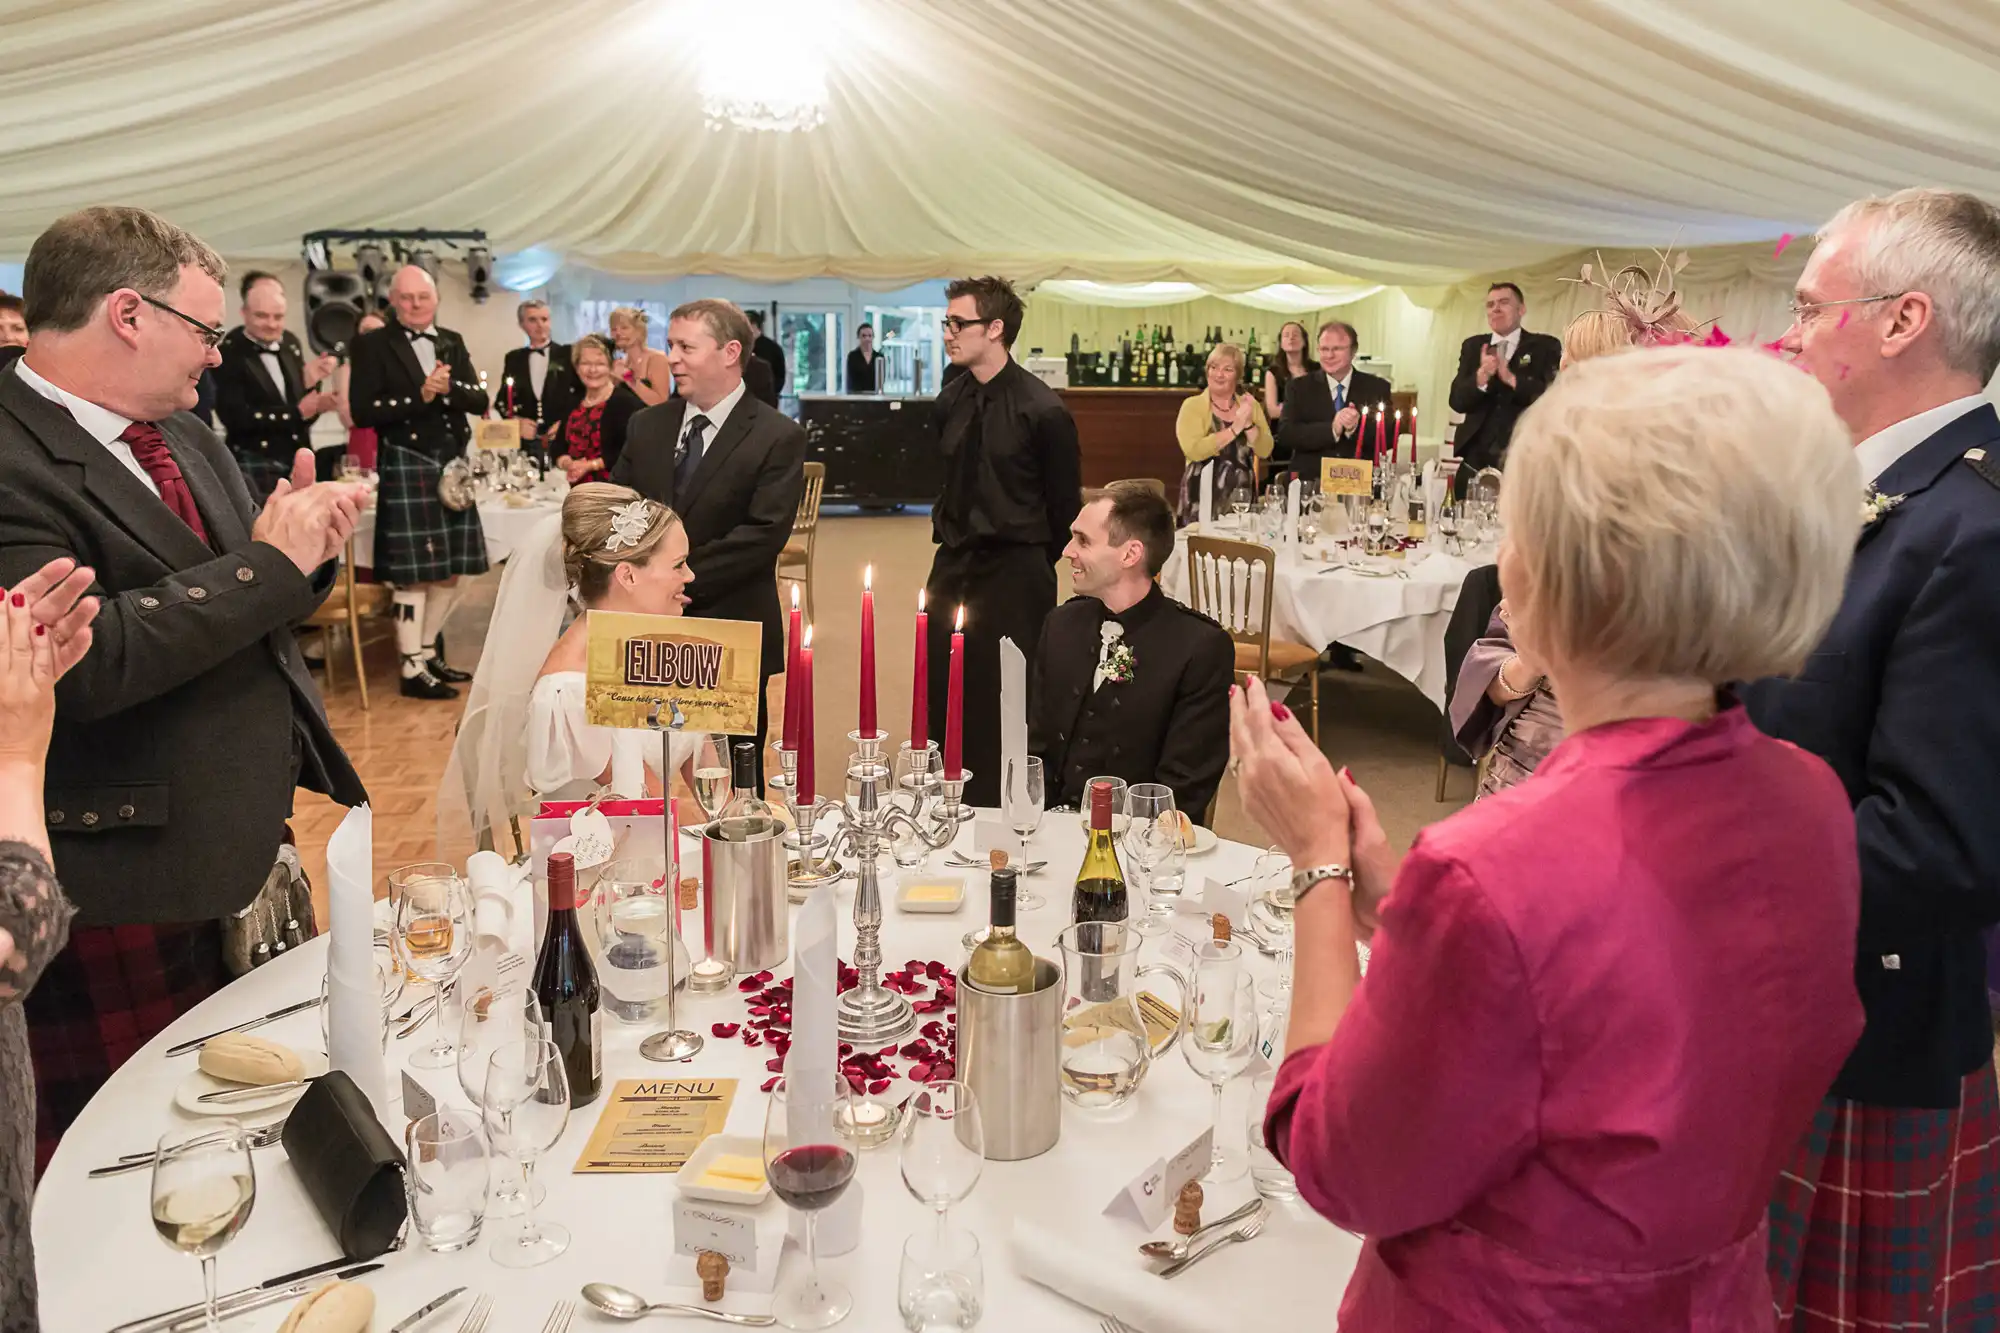 Guests in formal attire, including kilts, clapping hands at a candlelit banquet table during an elegant event in a large tent.